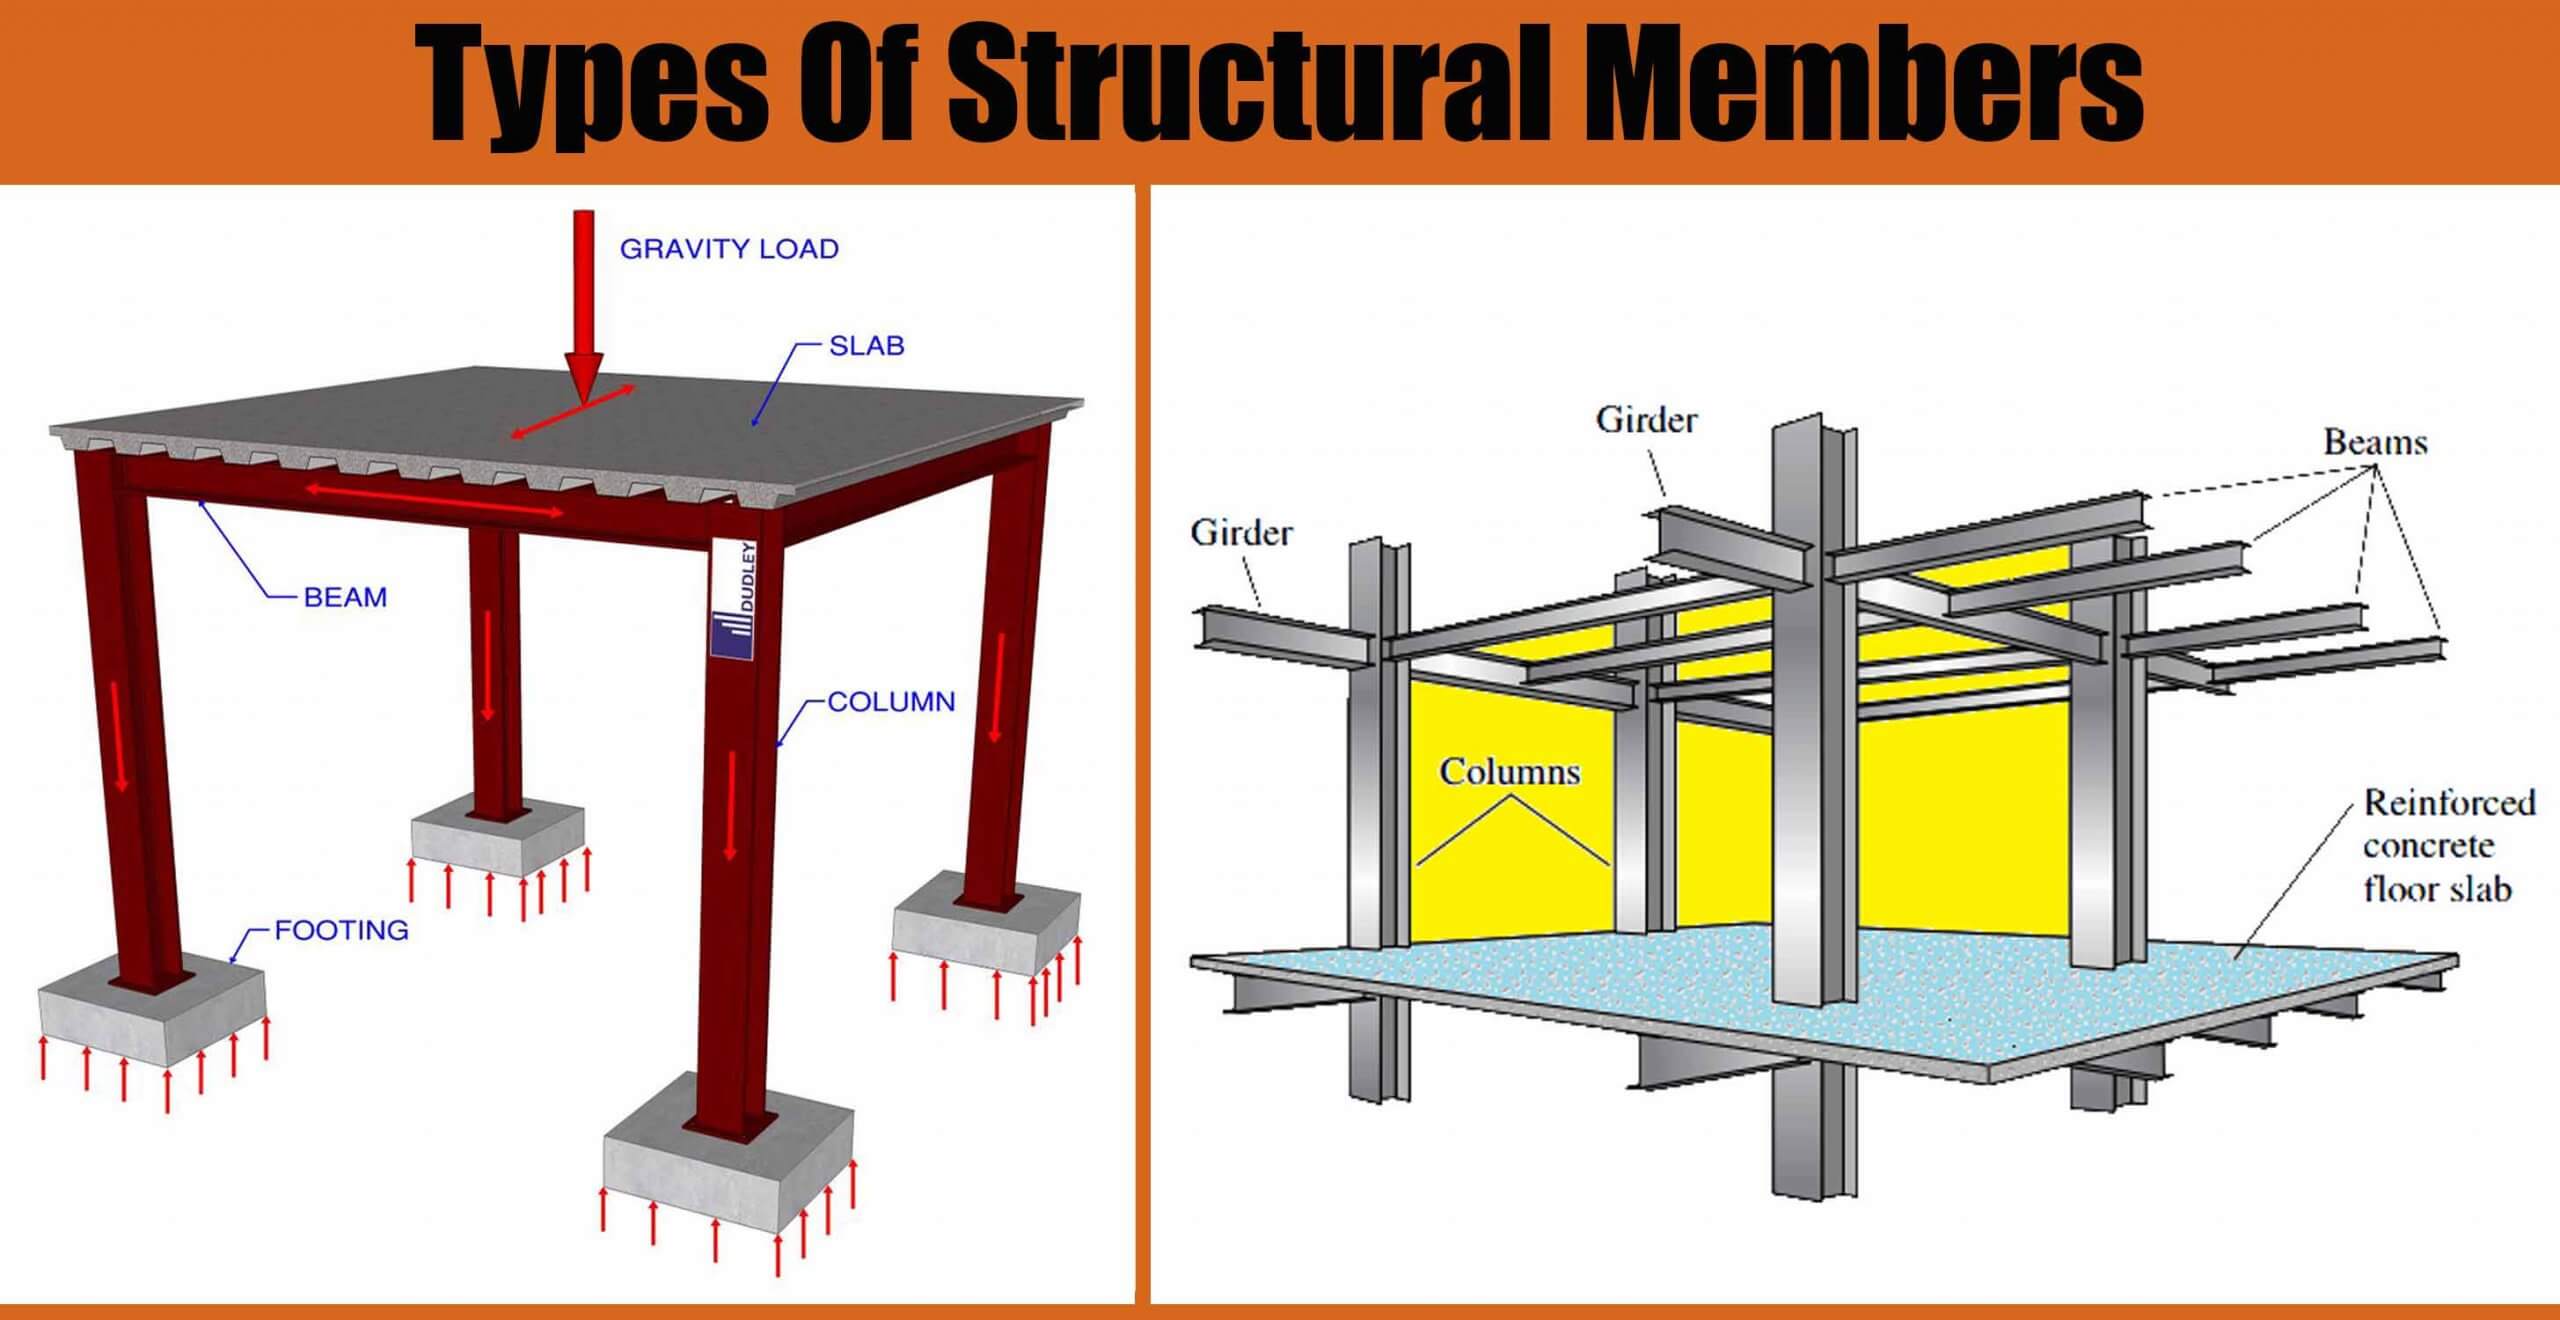 research areas in structural engineering